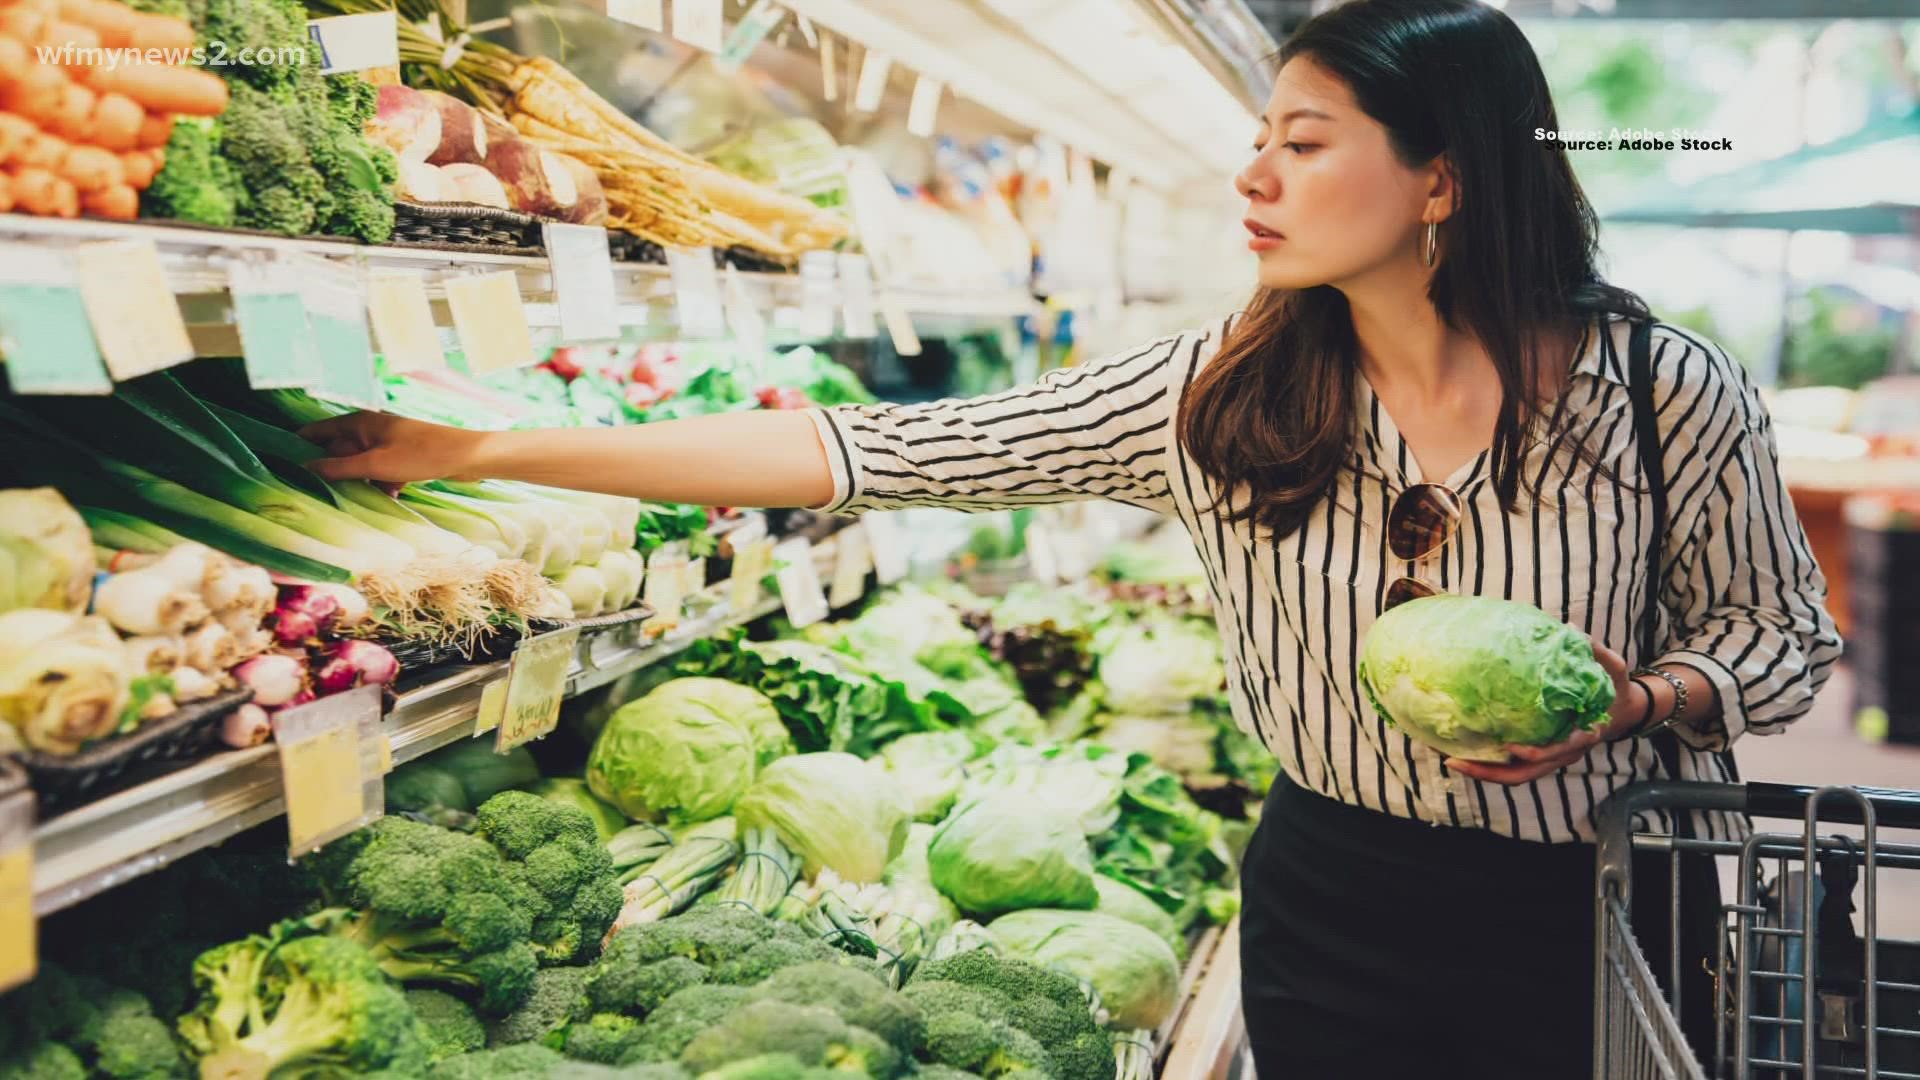 We went straight to an expert to find out some ways to save -- especially when it comes to grocery shopping.